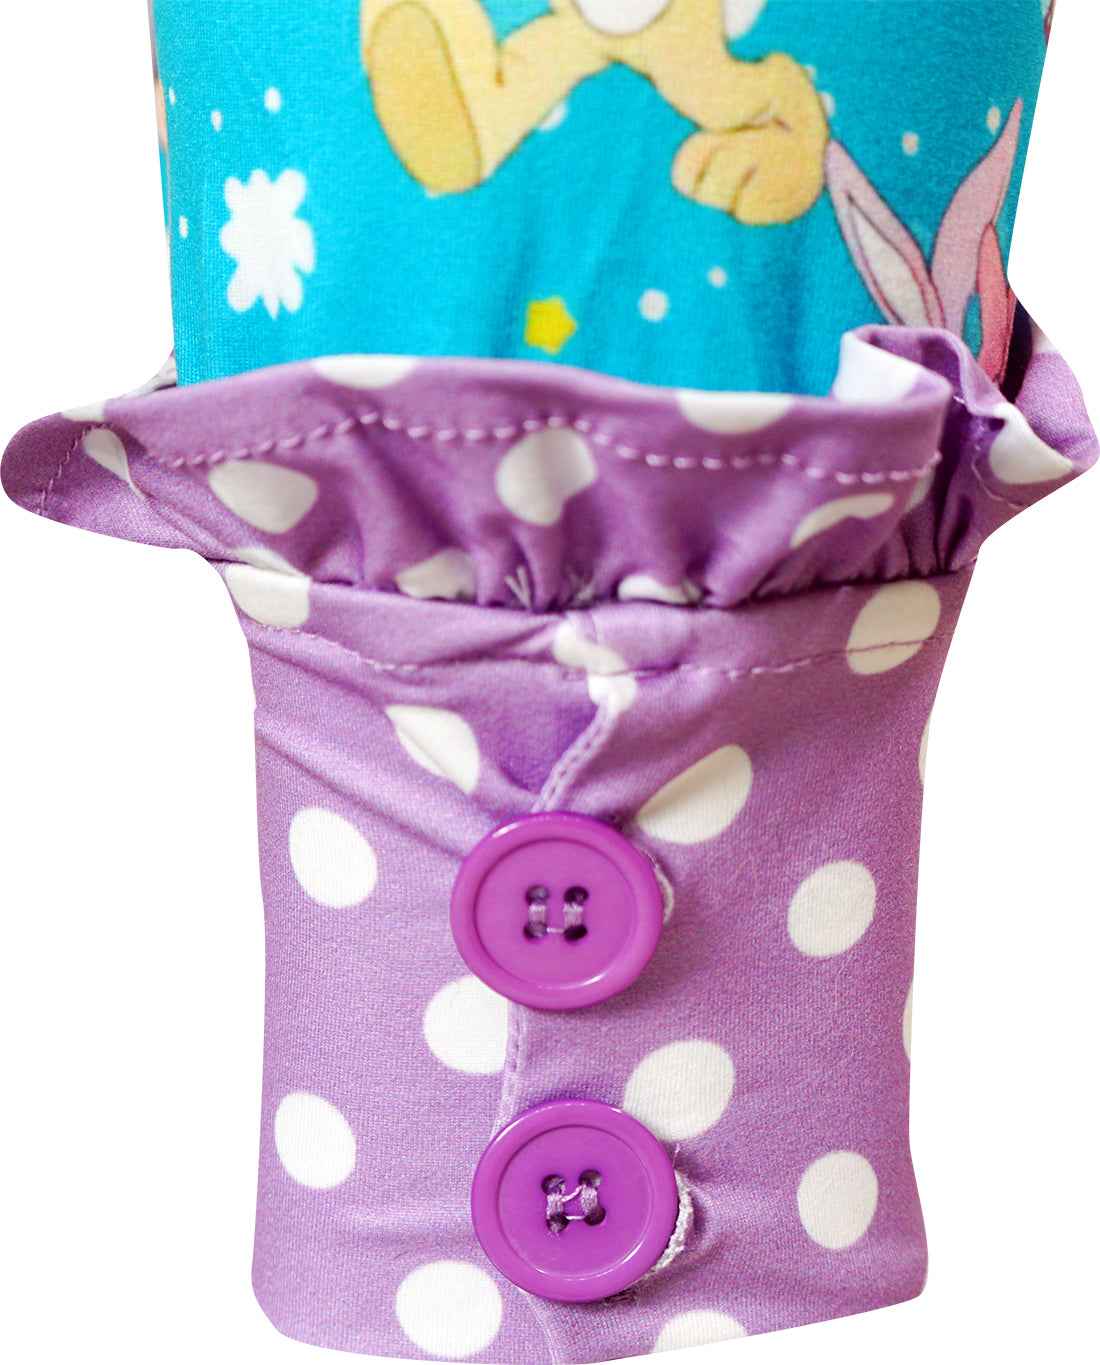 Toddler Little Girls Disney Inspired Minnie Easter Outfit with Scarf - Lavender Turquoise - Angeline Kids